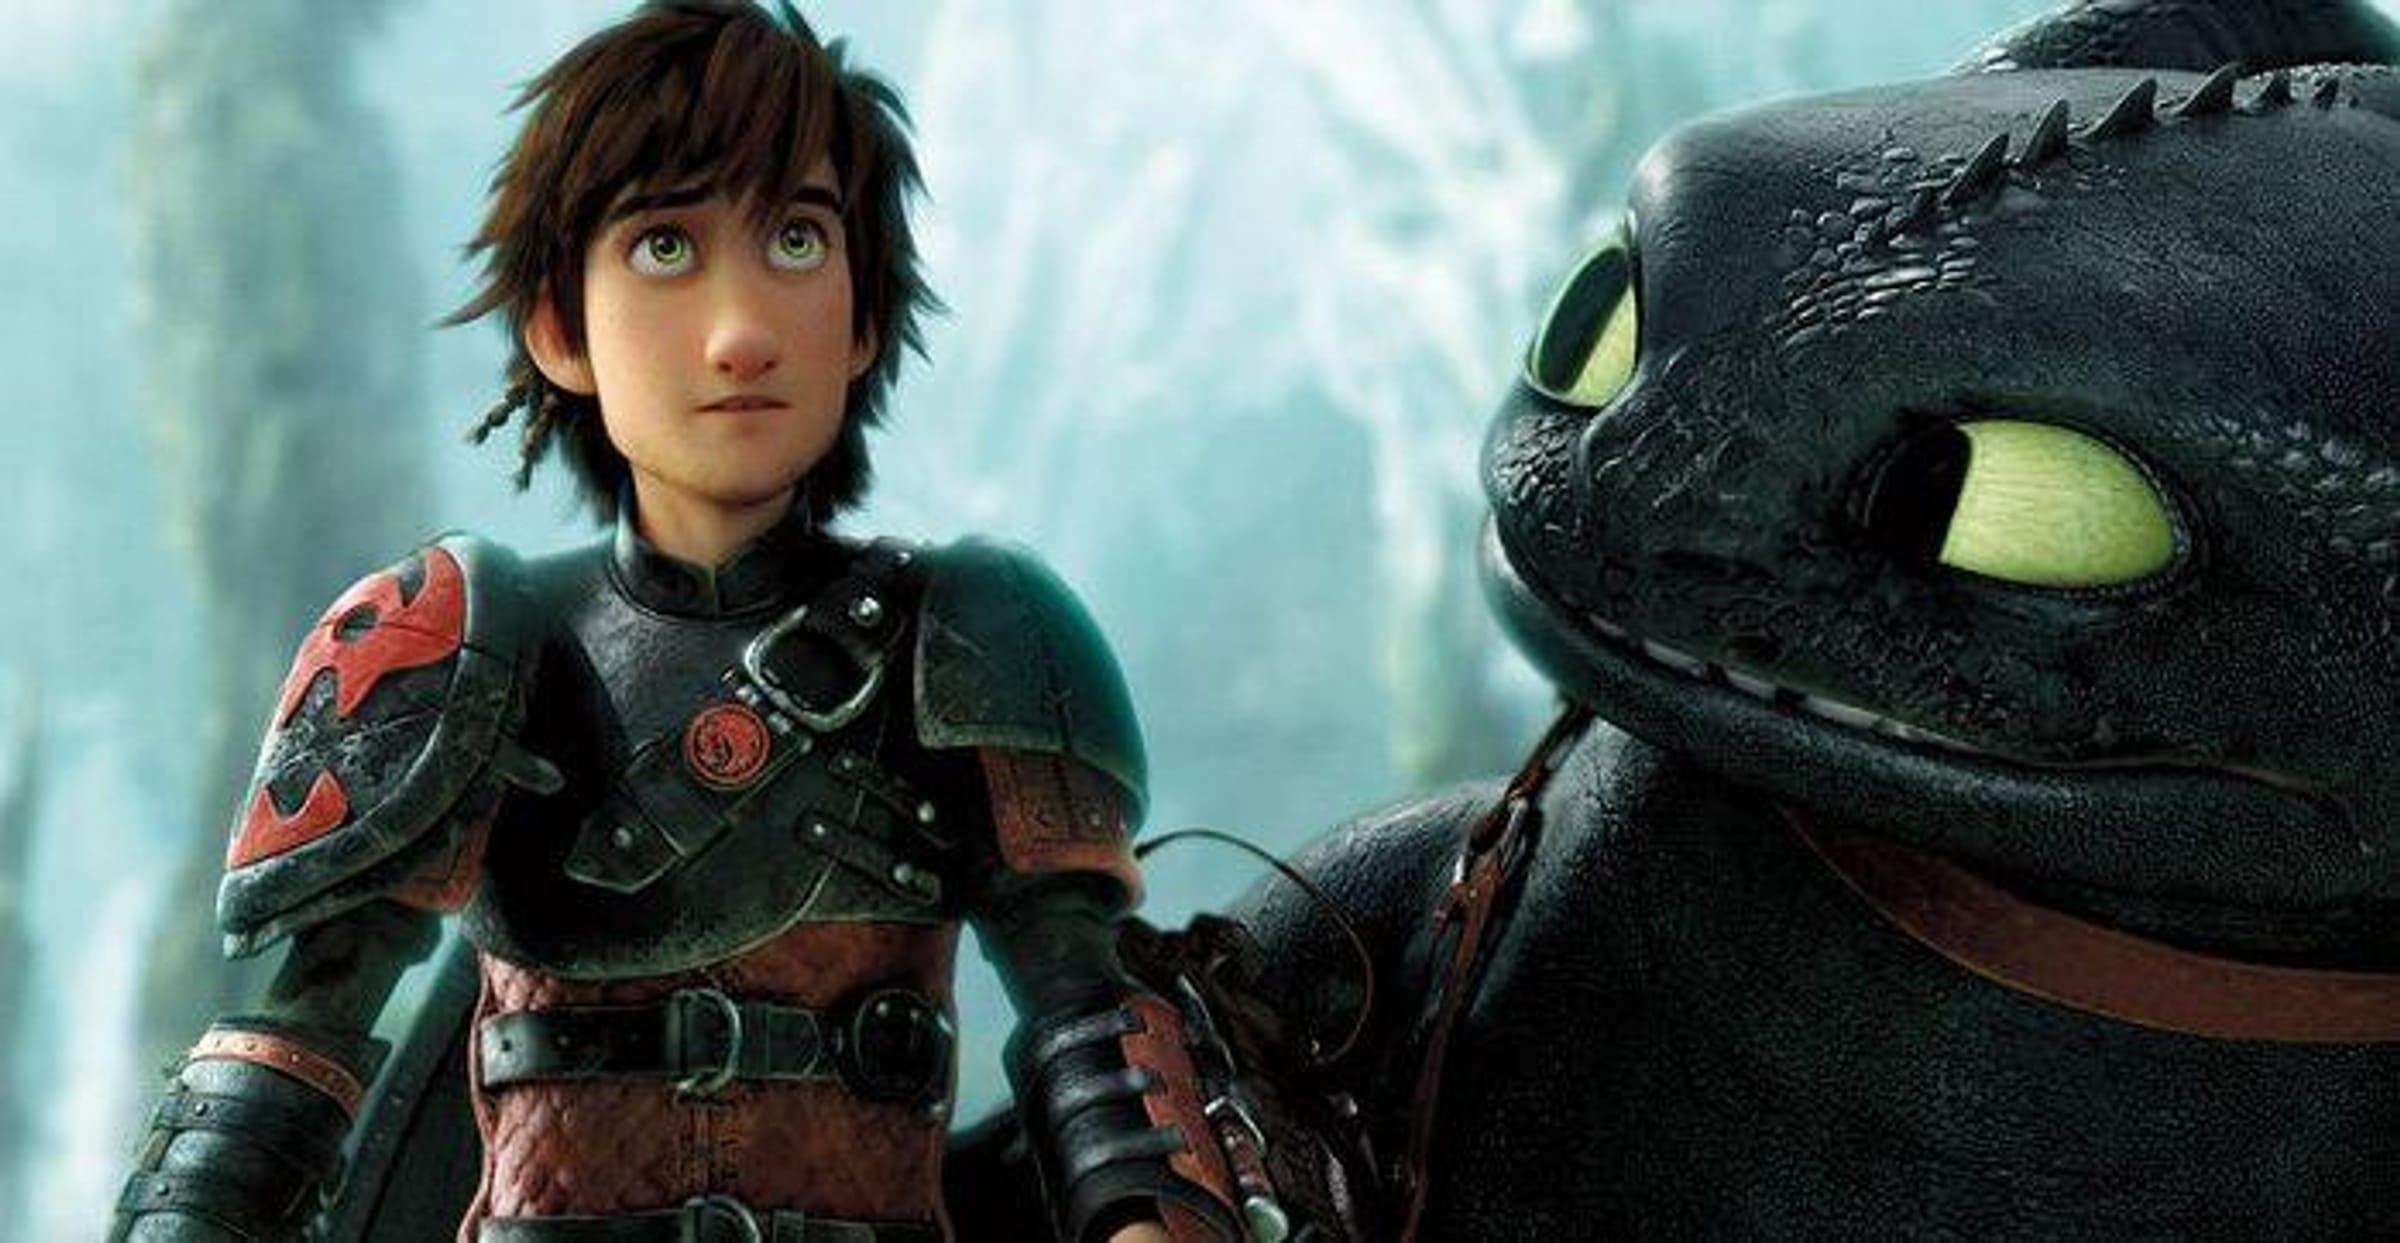 How to Train Your Dragon - It's hard to pick just one but we want to know,  which of these dragons from season 1 of Dragons: Race To The Edge is your